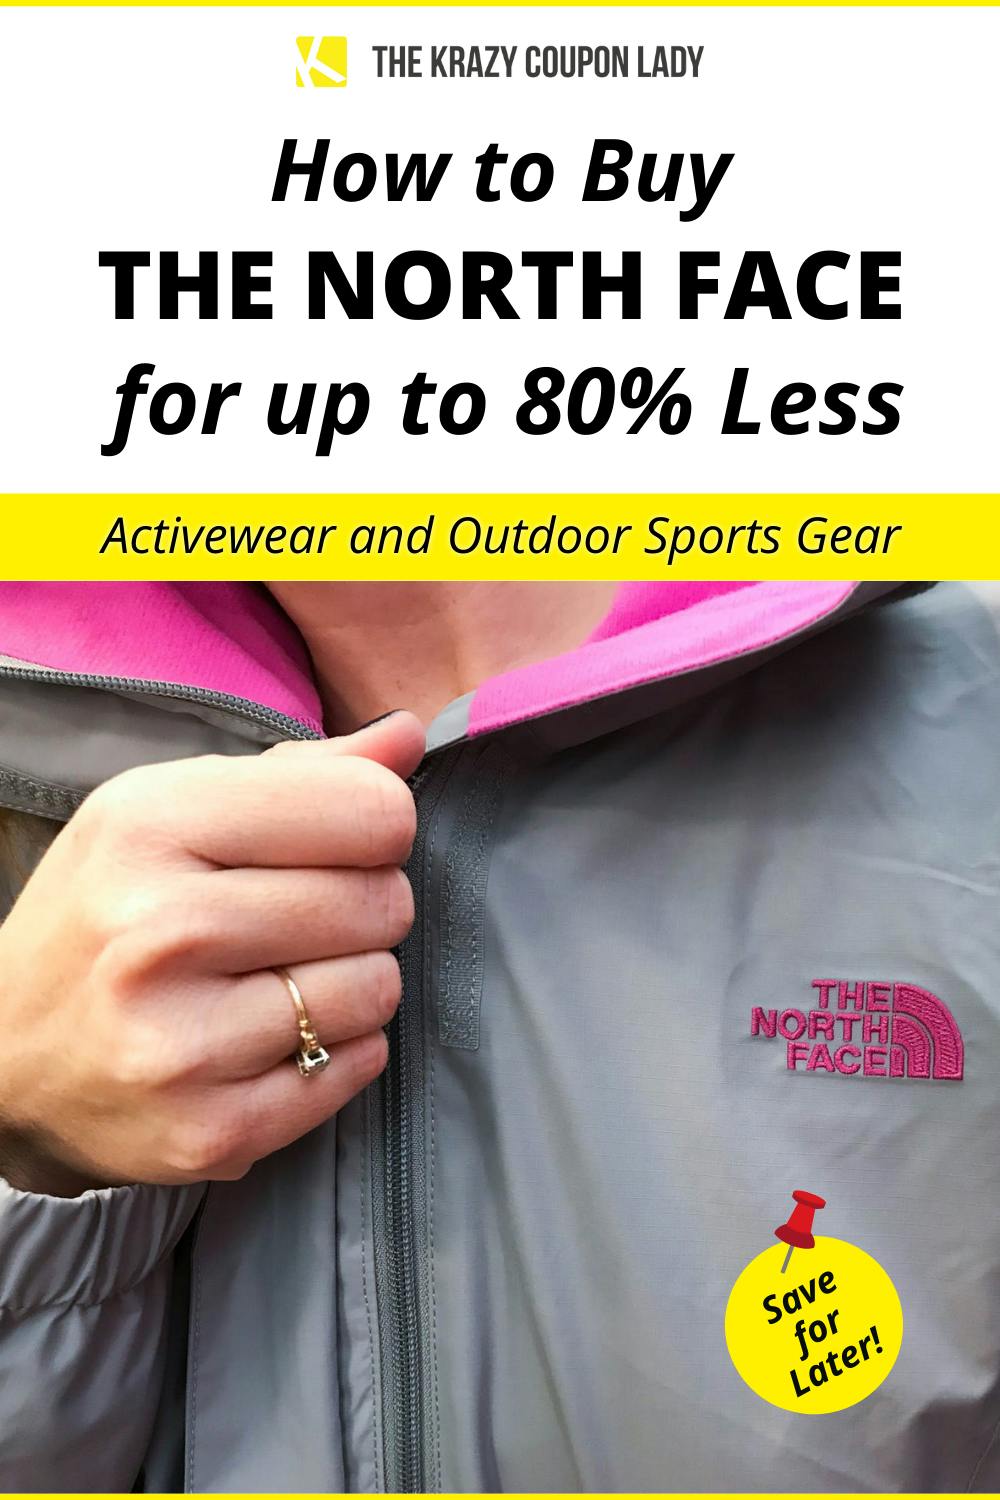 15 Ways to Get Cheap The North Face Gear (Not Just on Black Friday)